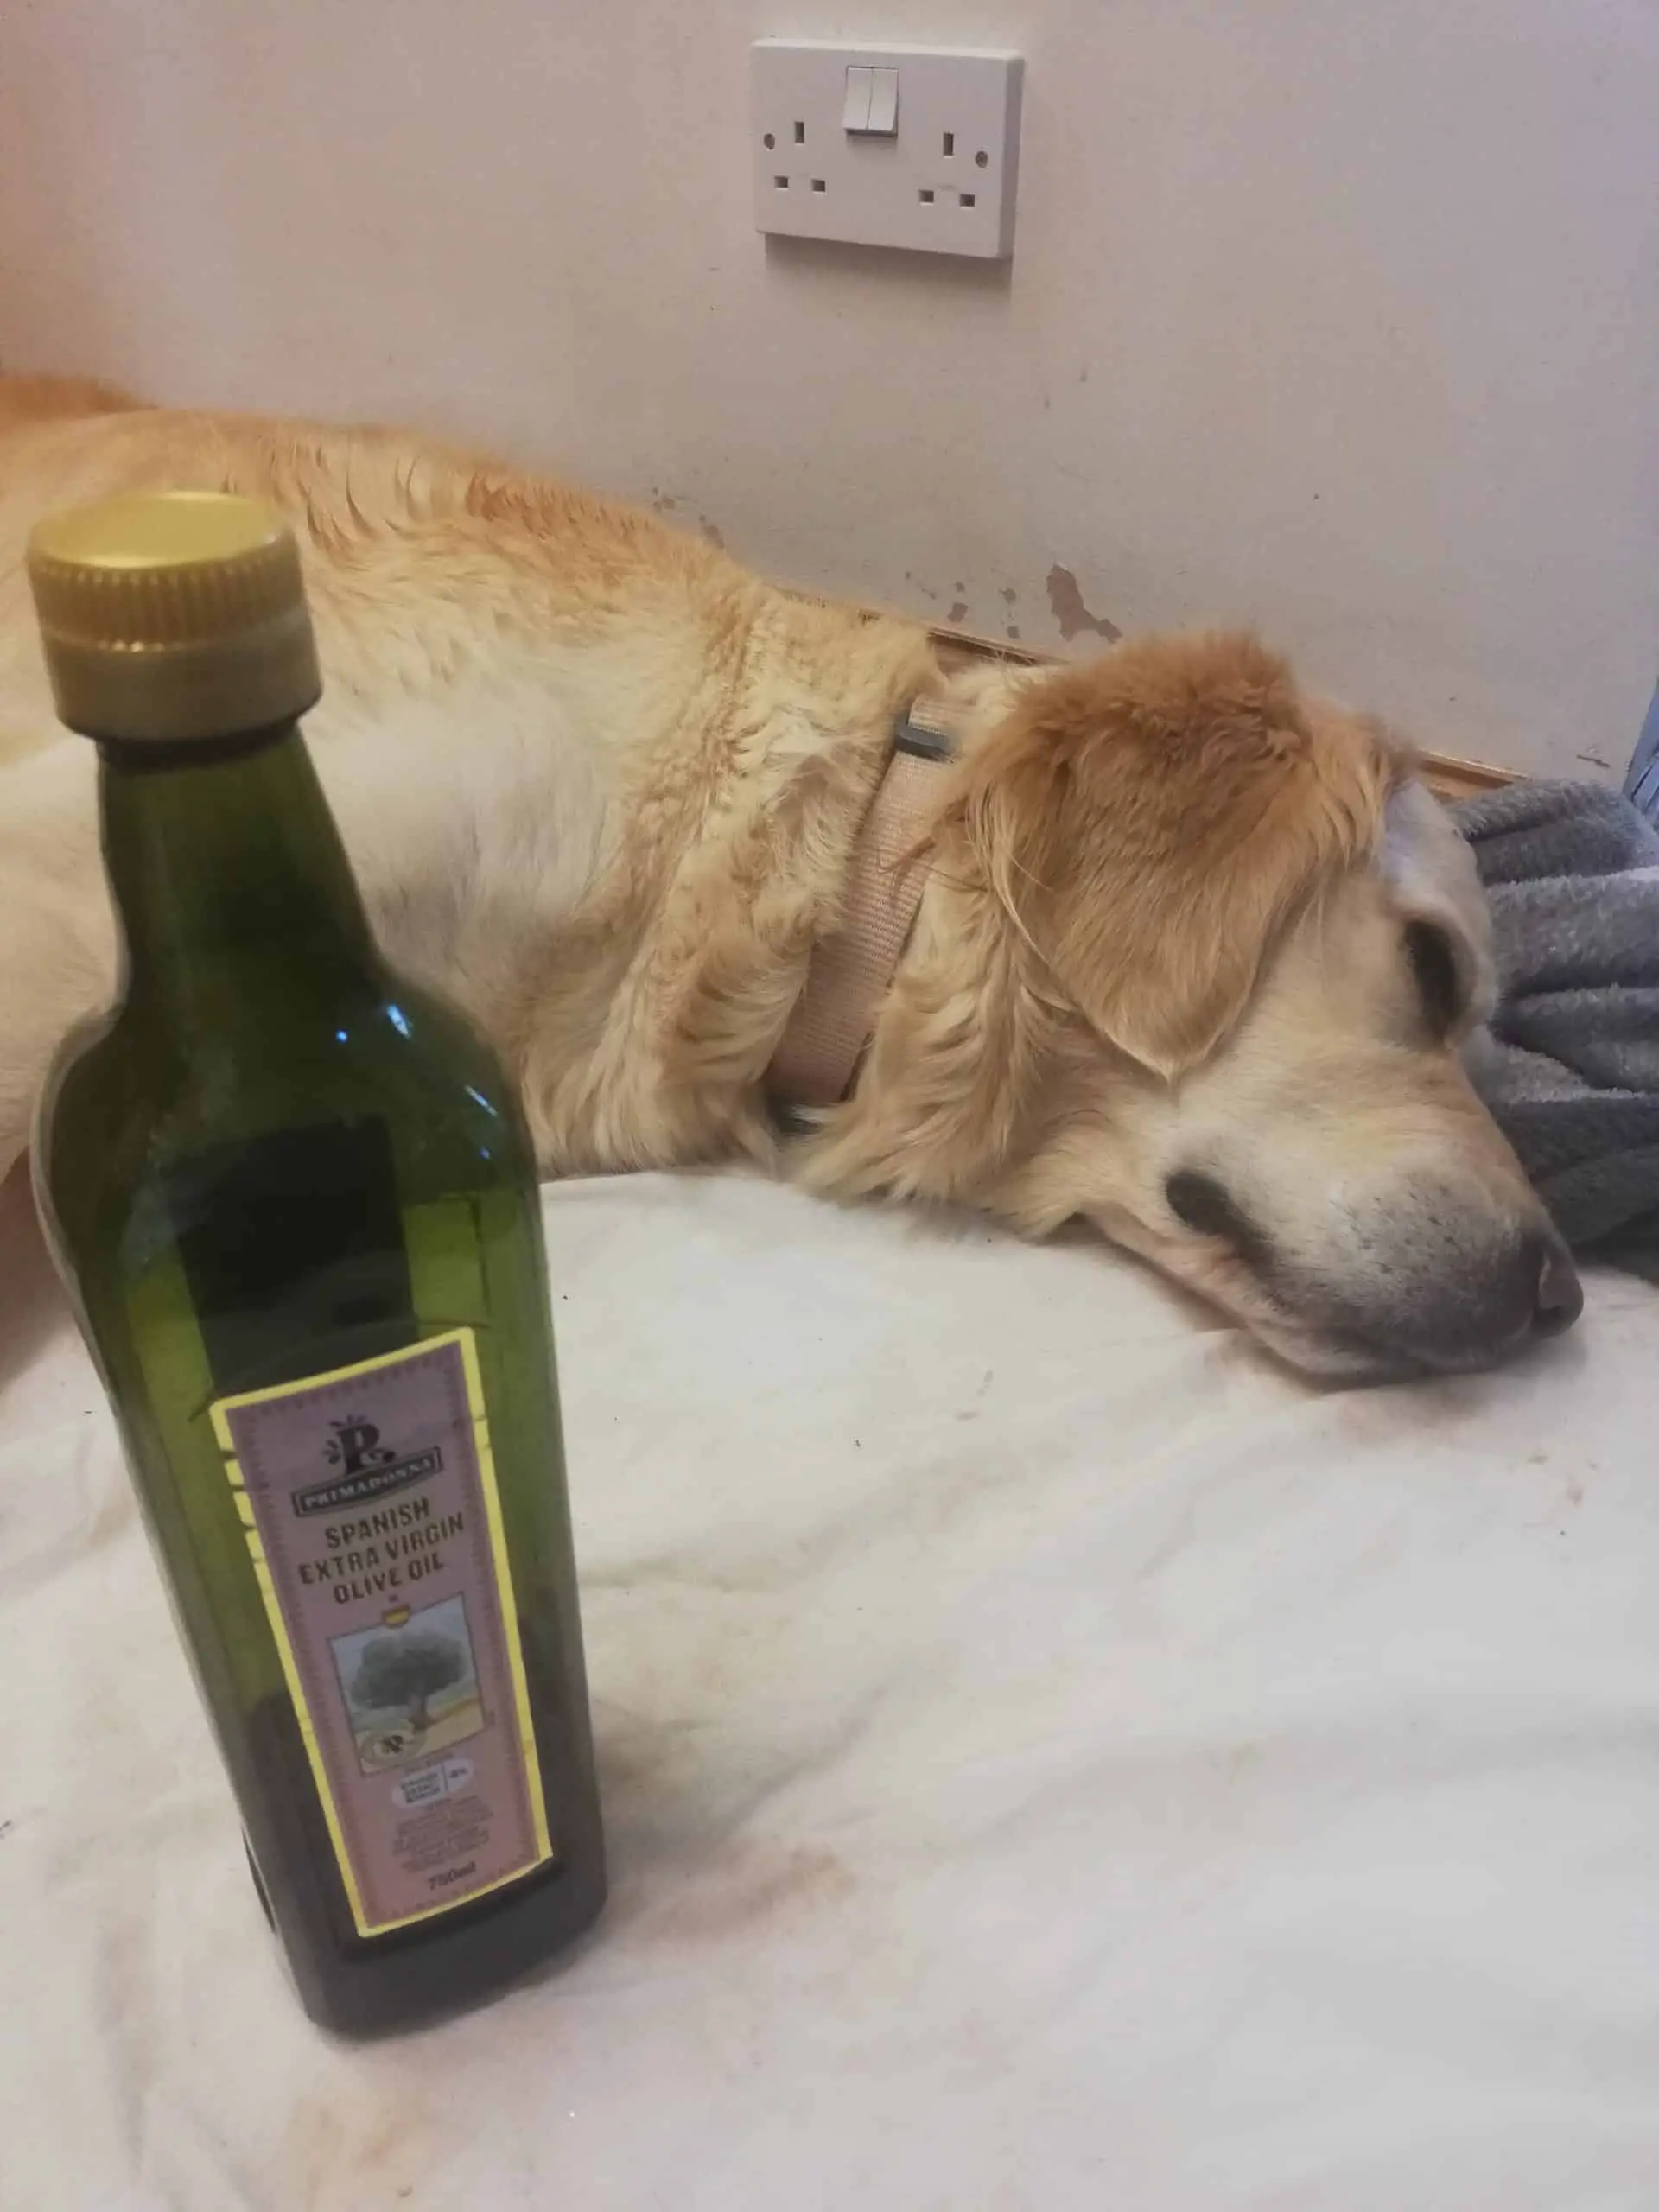 A golden retriever laying down with a bottle of vegetable oil next to her